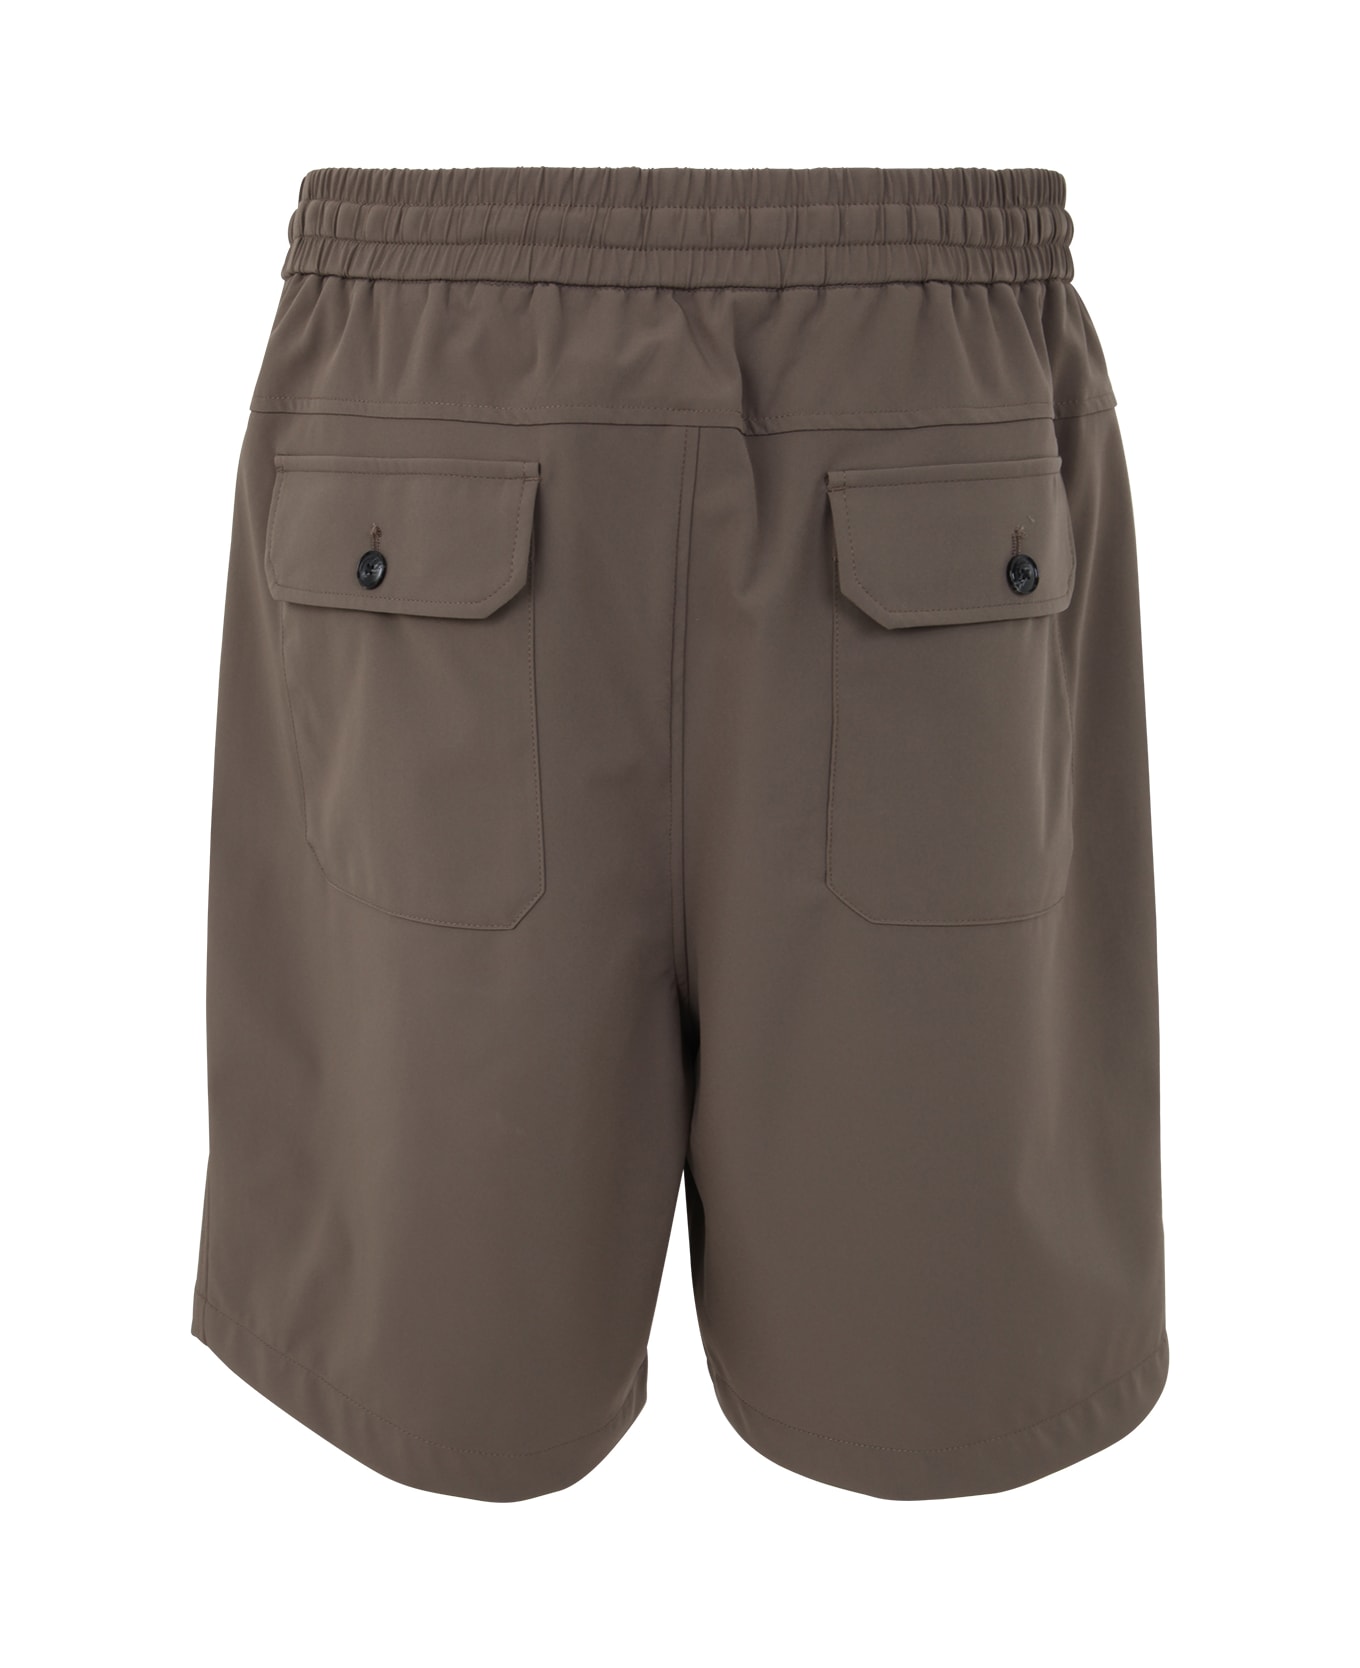 Emporio Armani Knitted Shorts - Mud